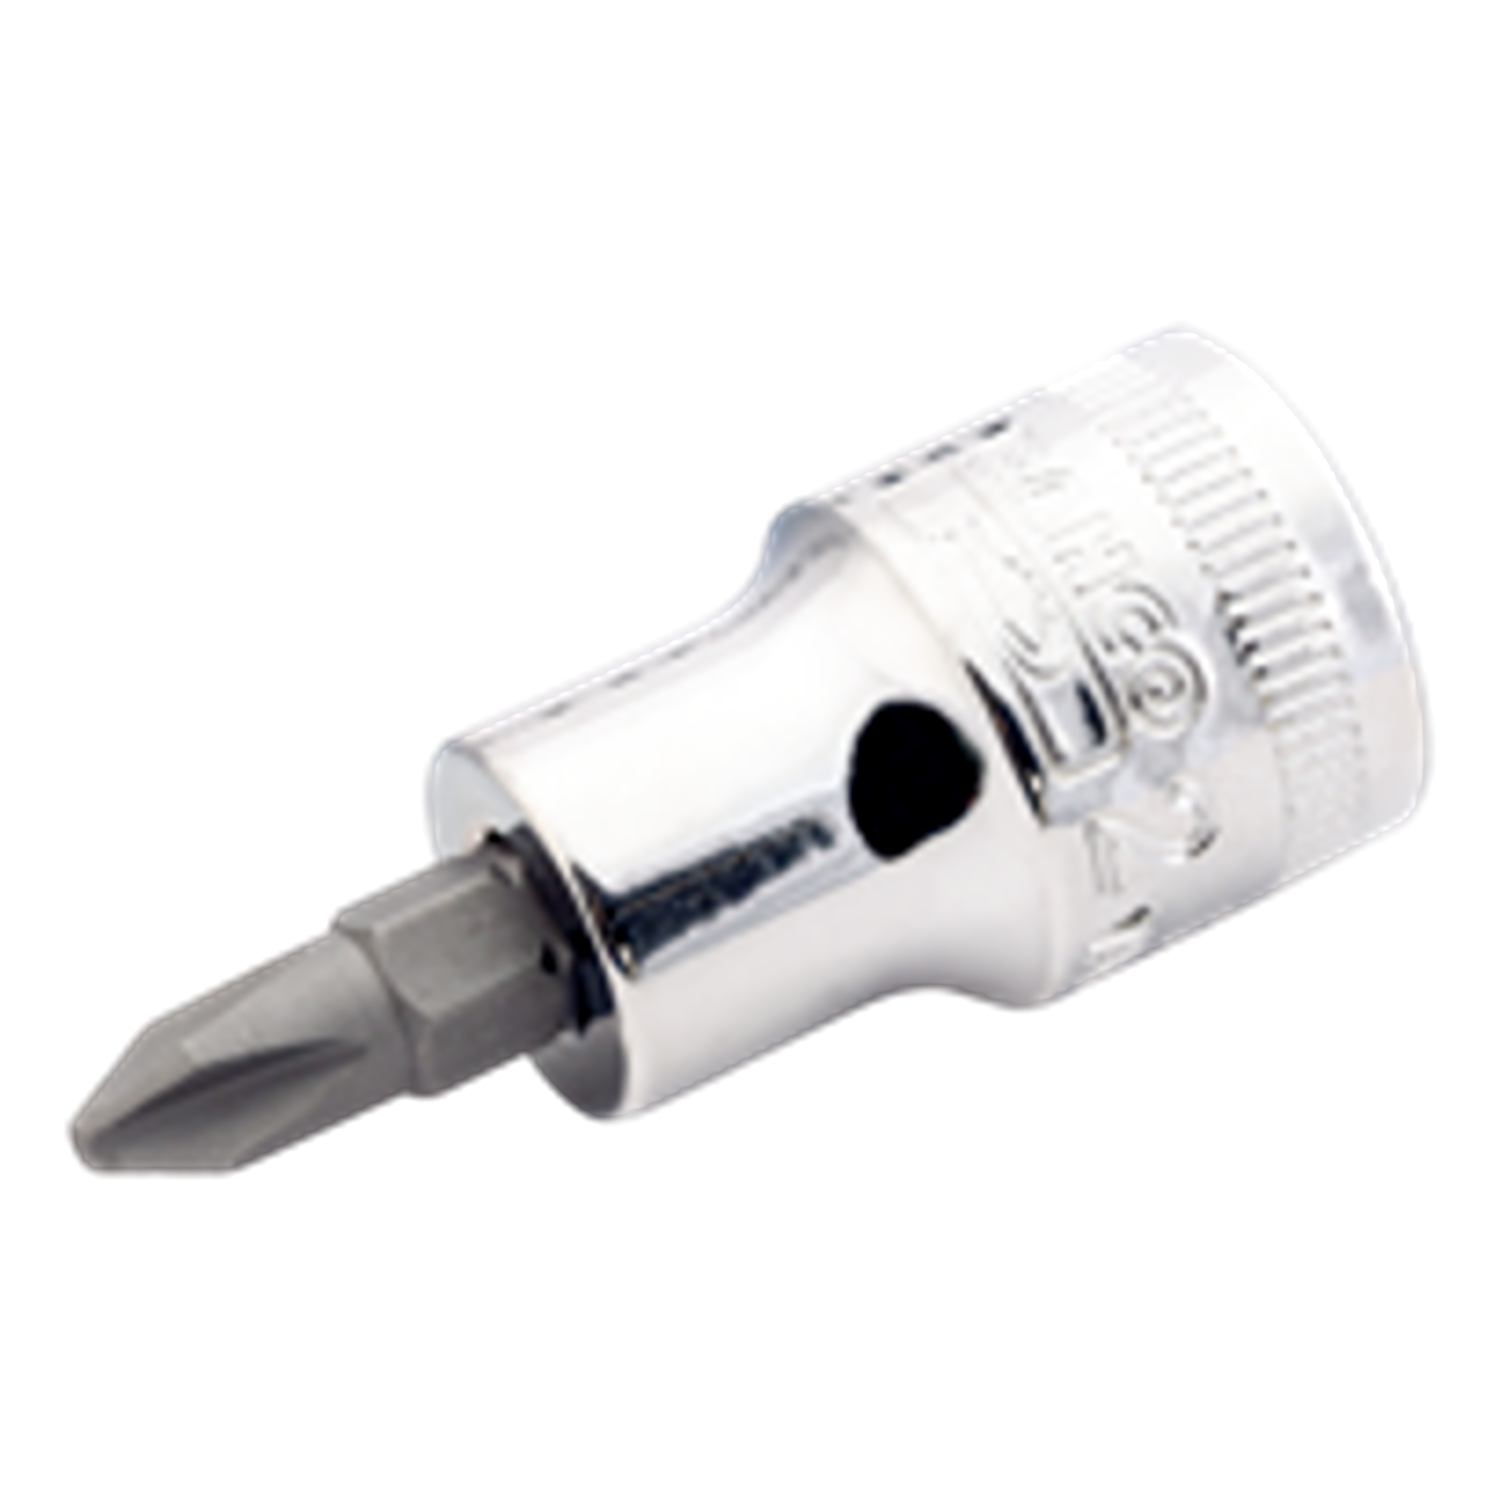 BAHCO 7409PH 3/8" Screwdriver Socket Philips Head Square Drive - Premium Screwdriver Socket from BAHCO - Shop now at Yew Aik.